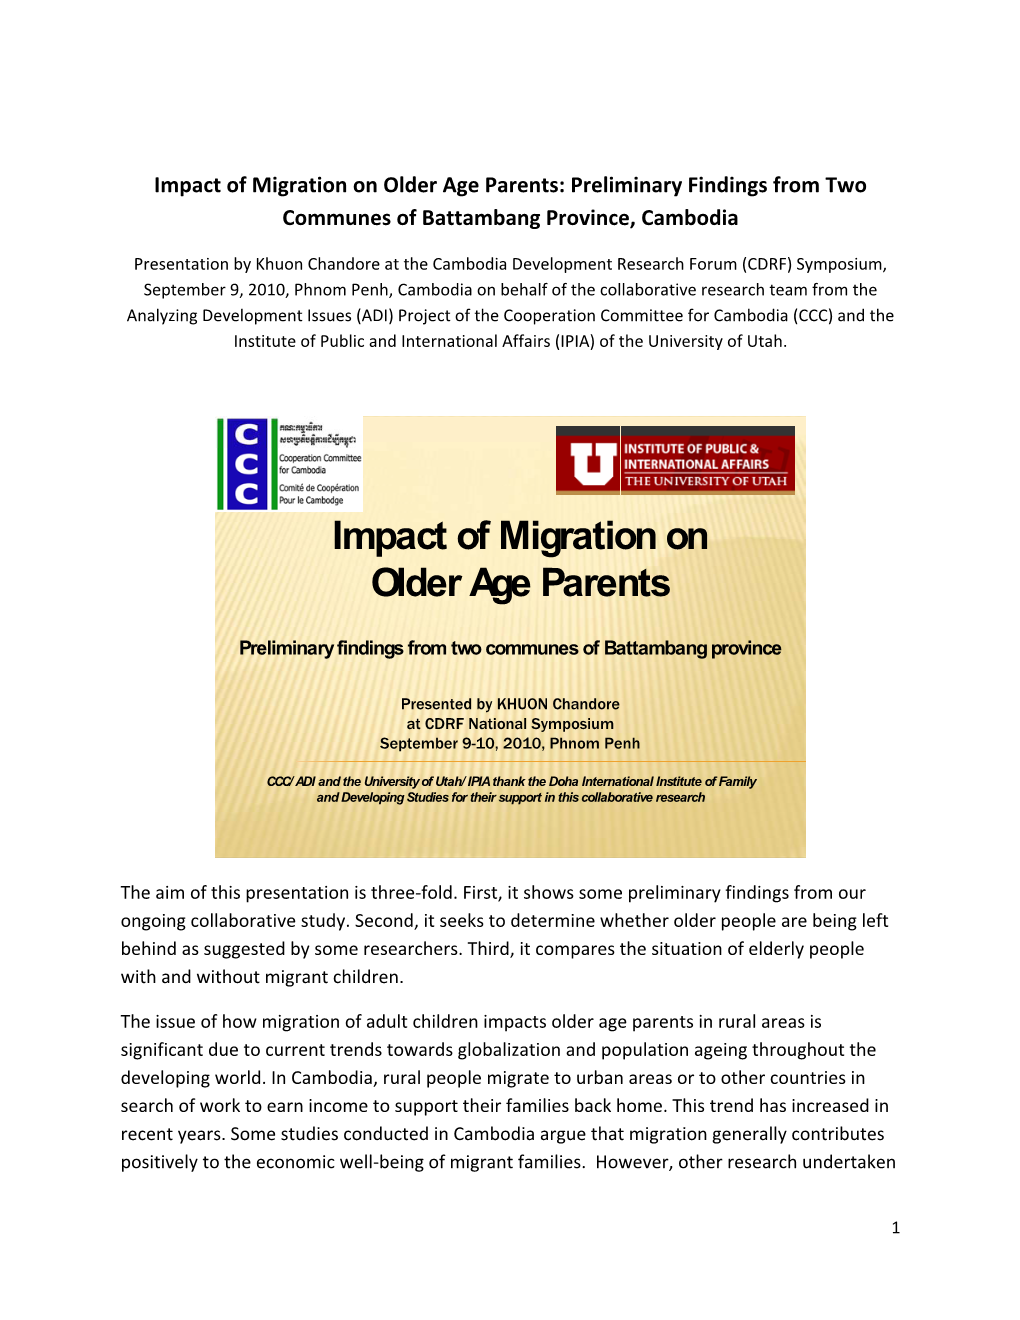 Impact of Migration on Older Age Parents: Preliminary Findings from Two Communes of Battambang Province, Cambodia